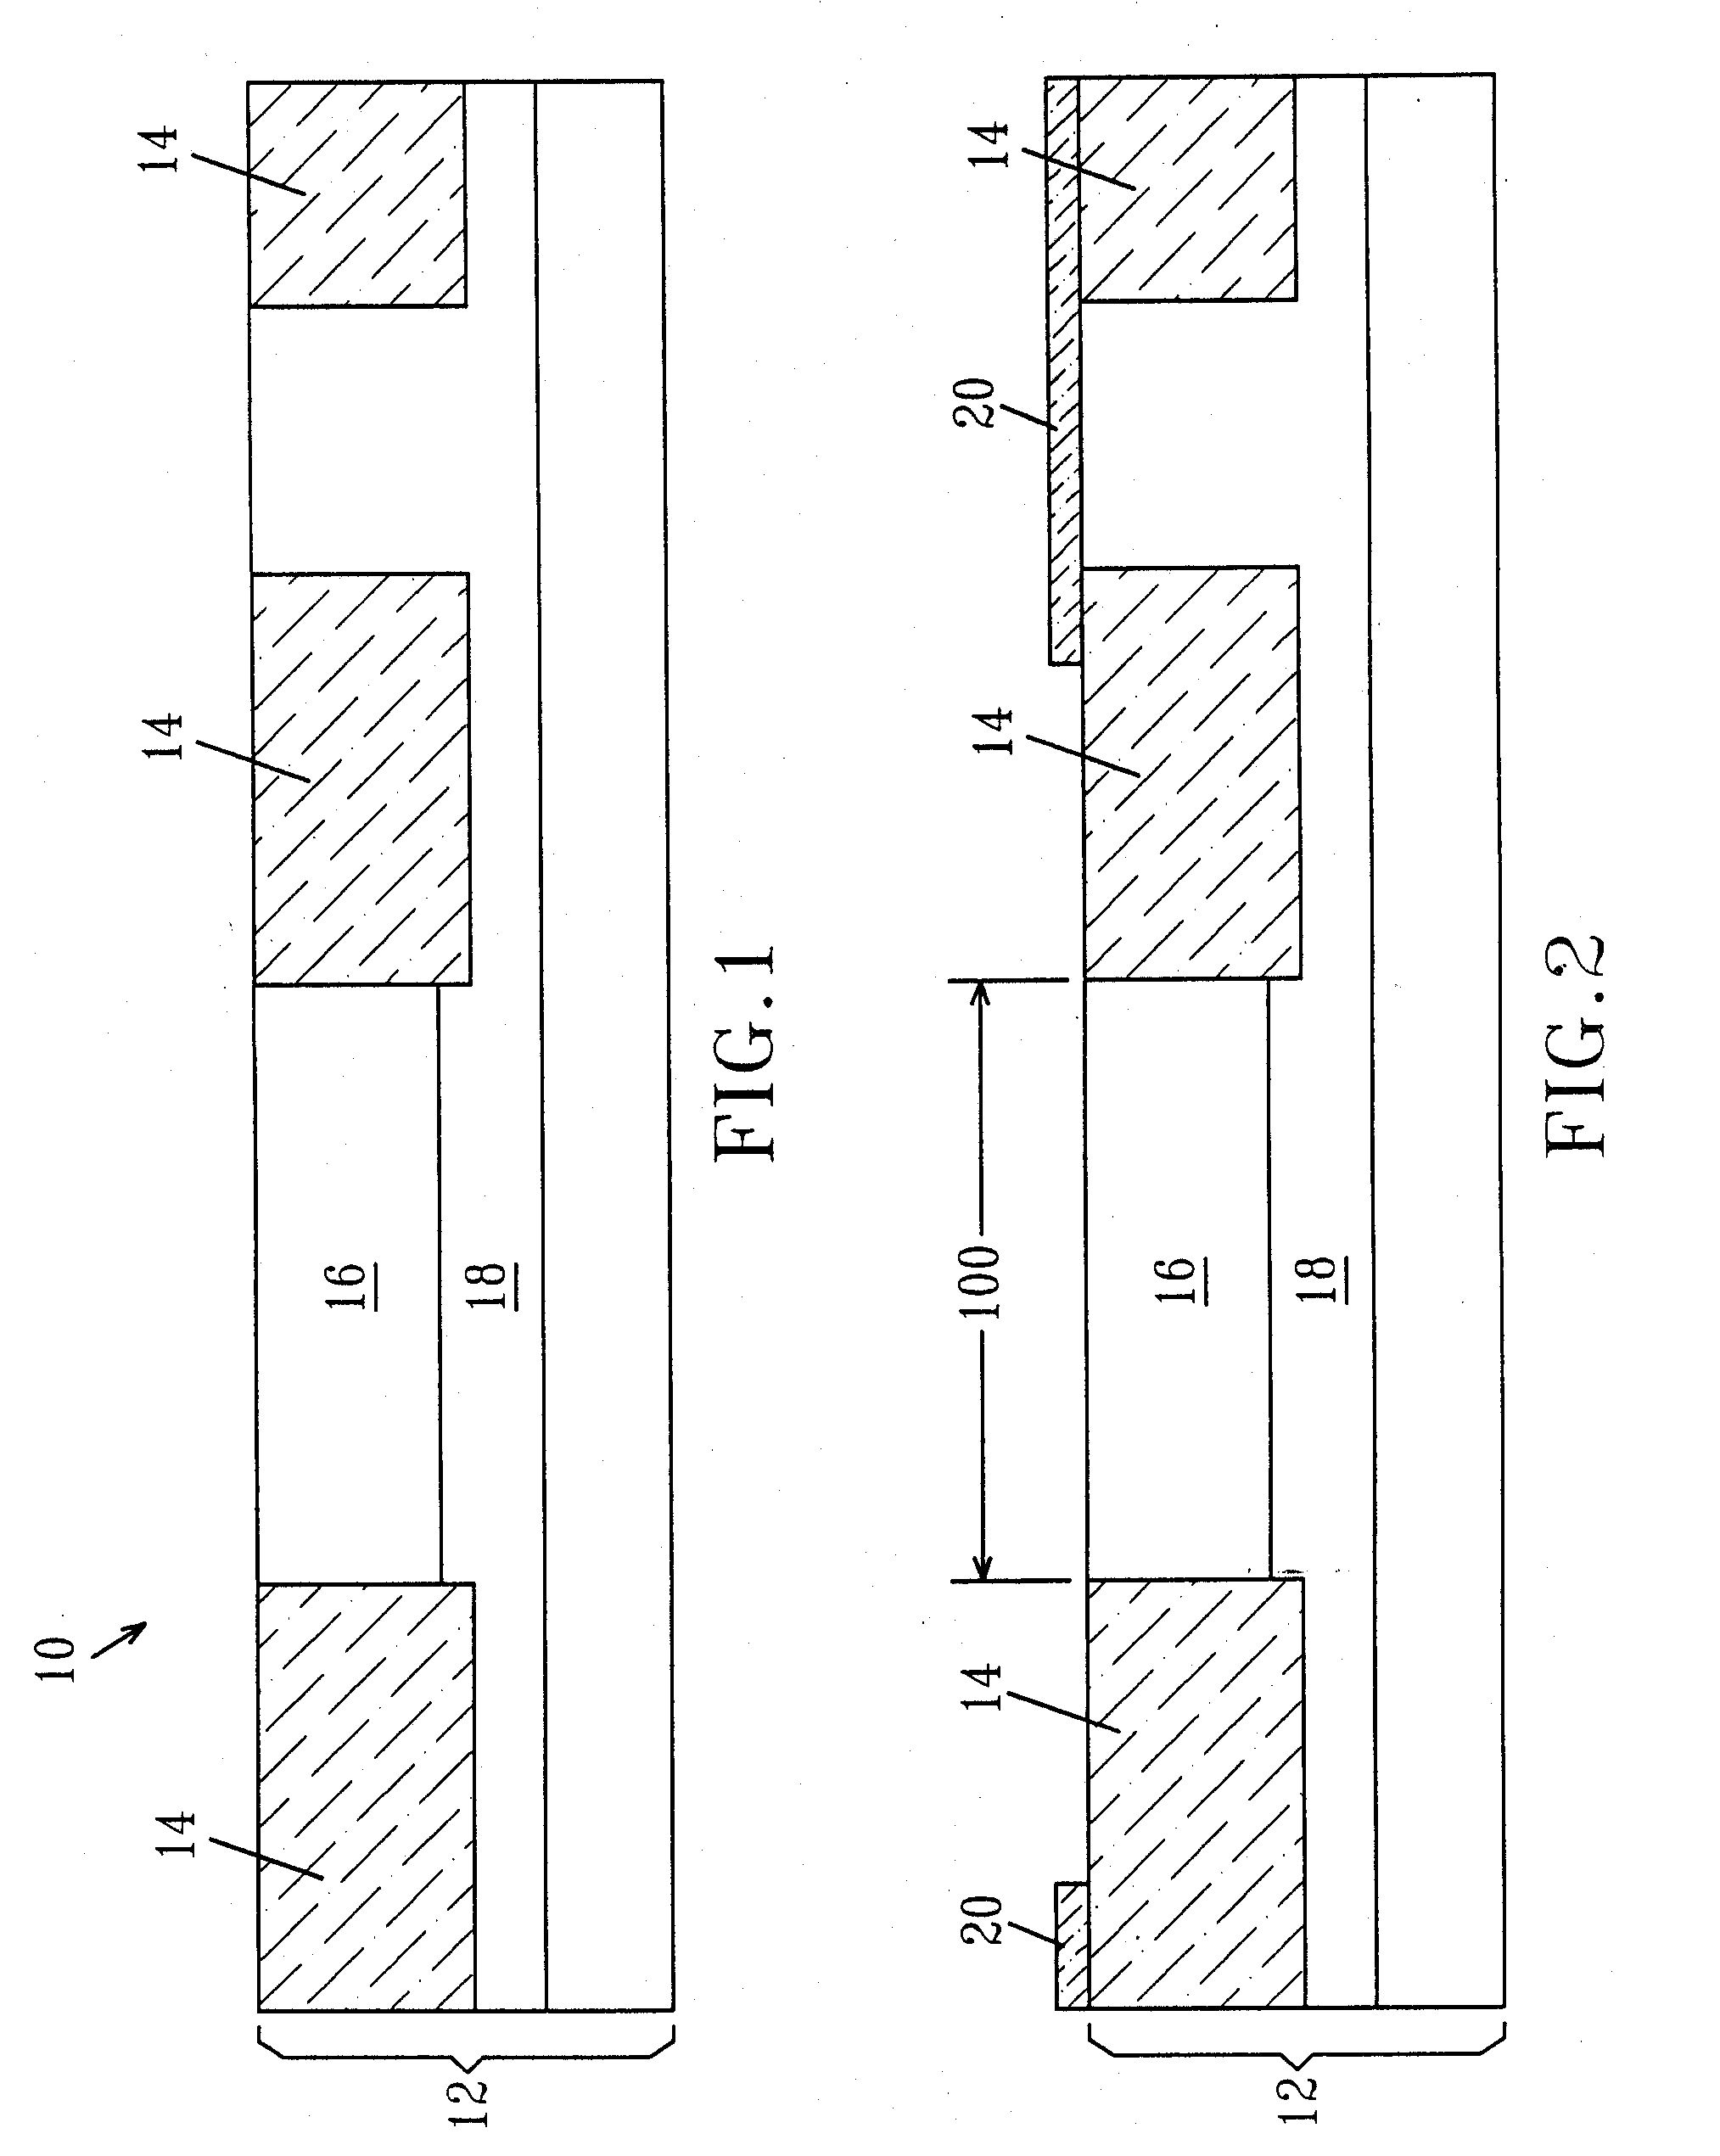 BIPOLAR TRANSISTOR WITH COLLECTOR HAVING AN EPITAXIAL Si:C REGION